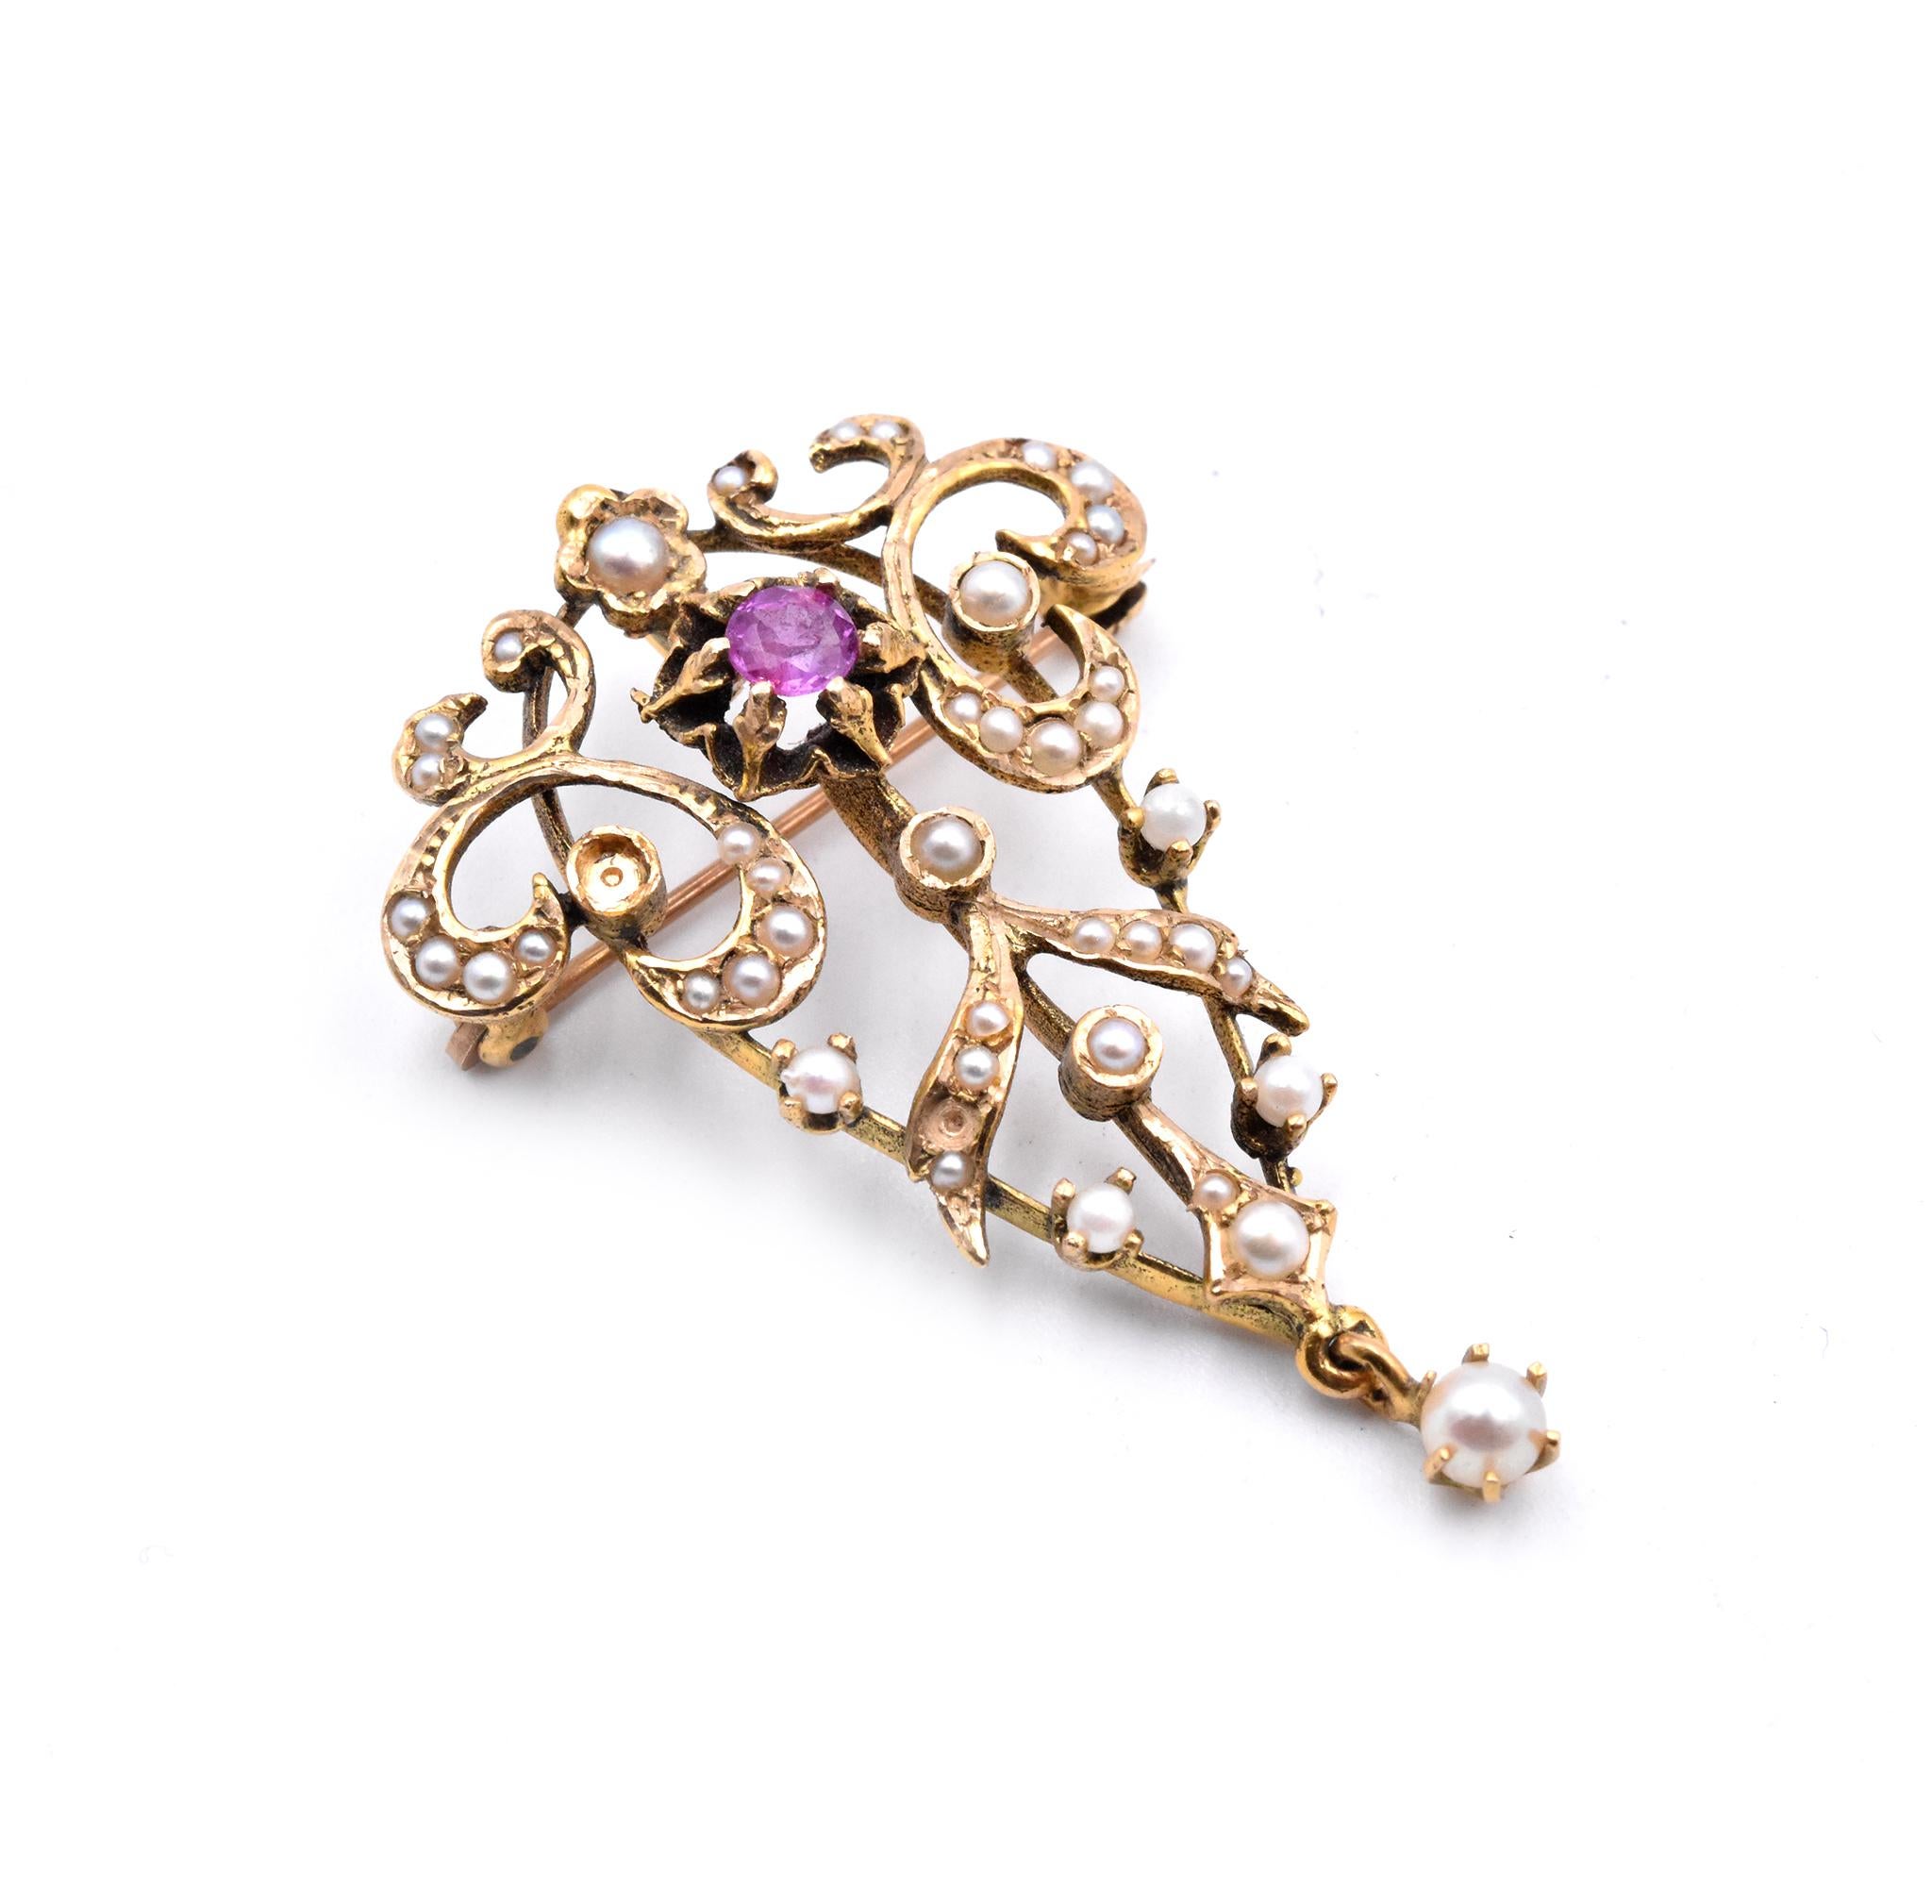 Designer: custom
Material: 14K yellow gold
Gemstone: Ruby = .20ct 
Dimensions: pin is approximately 42mm by 27mm
Weight: 5.69 grams
